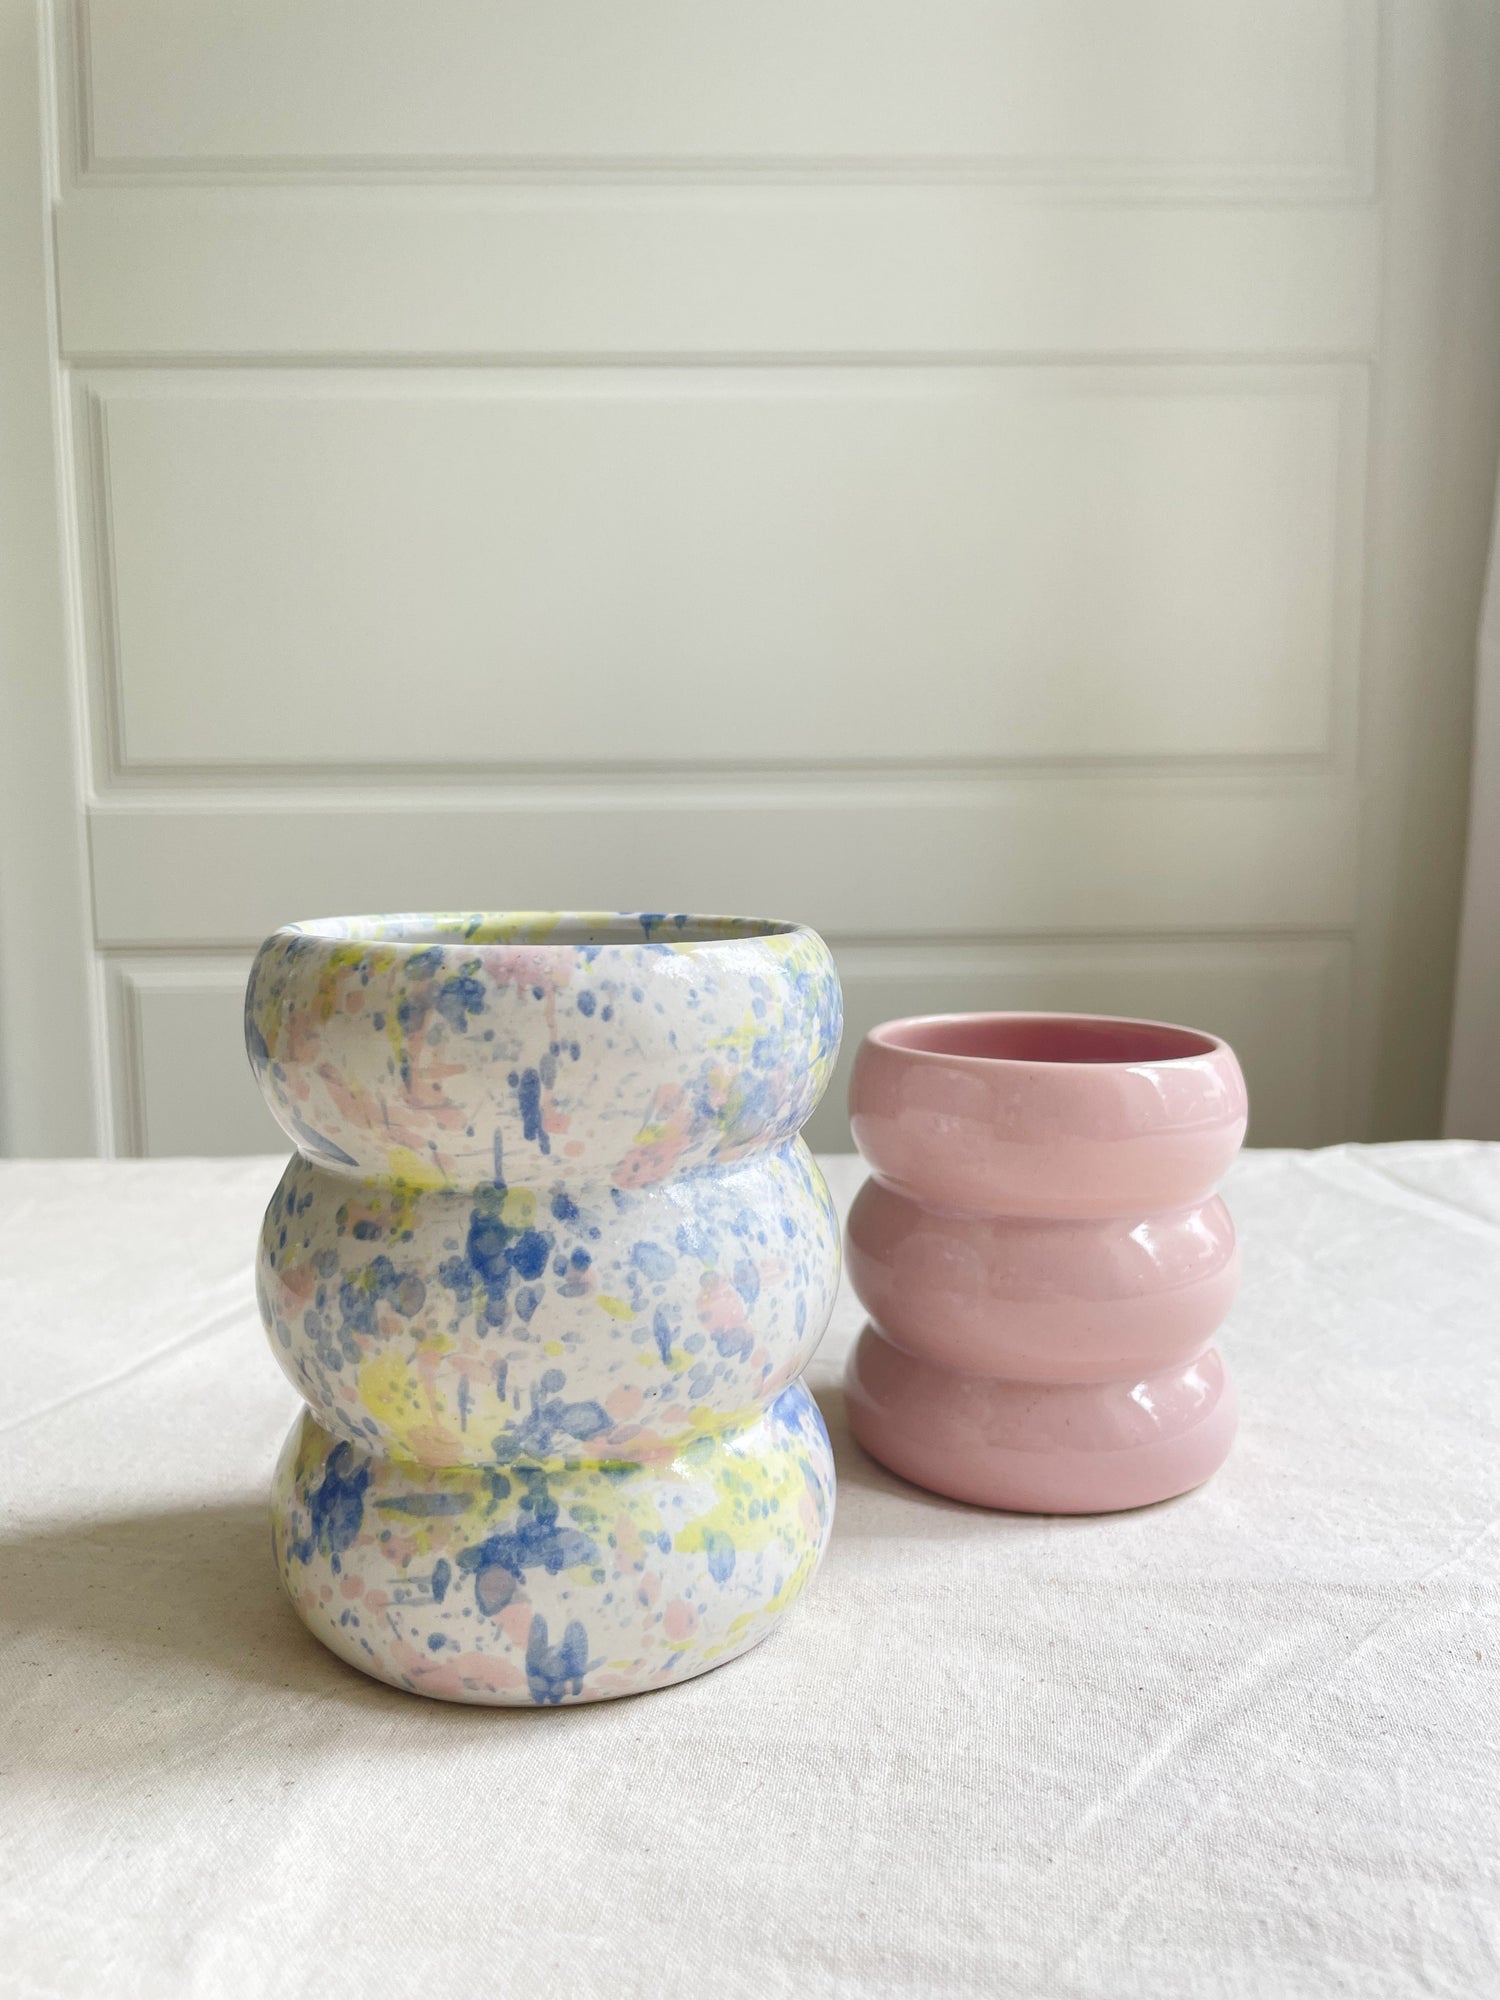 handmade ceramic mug with fun bubbled design and pastel colors